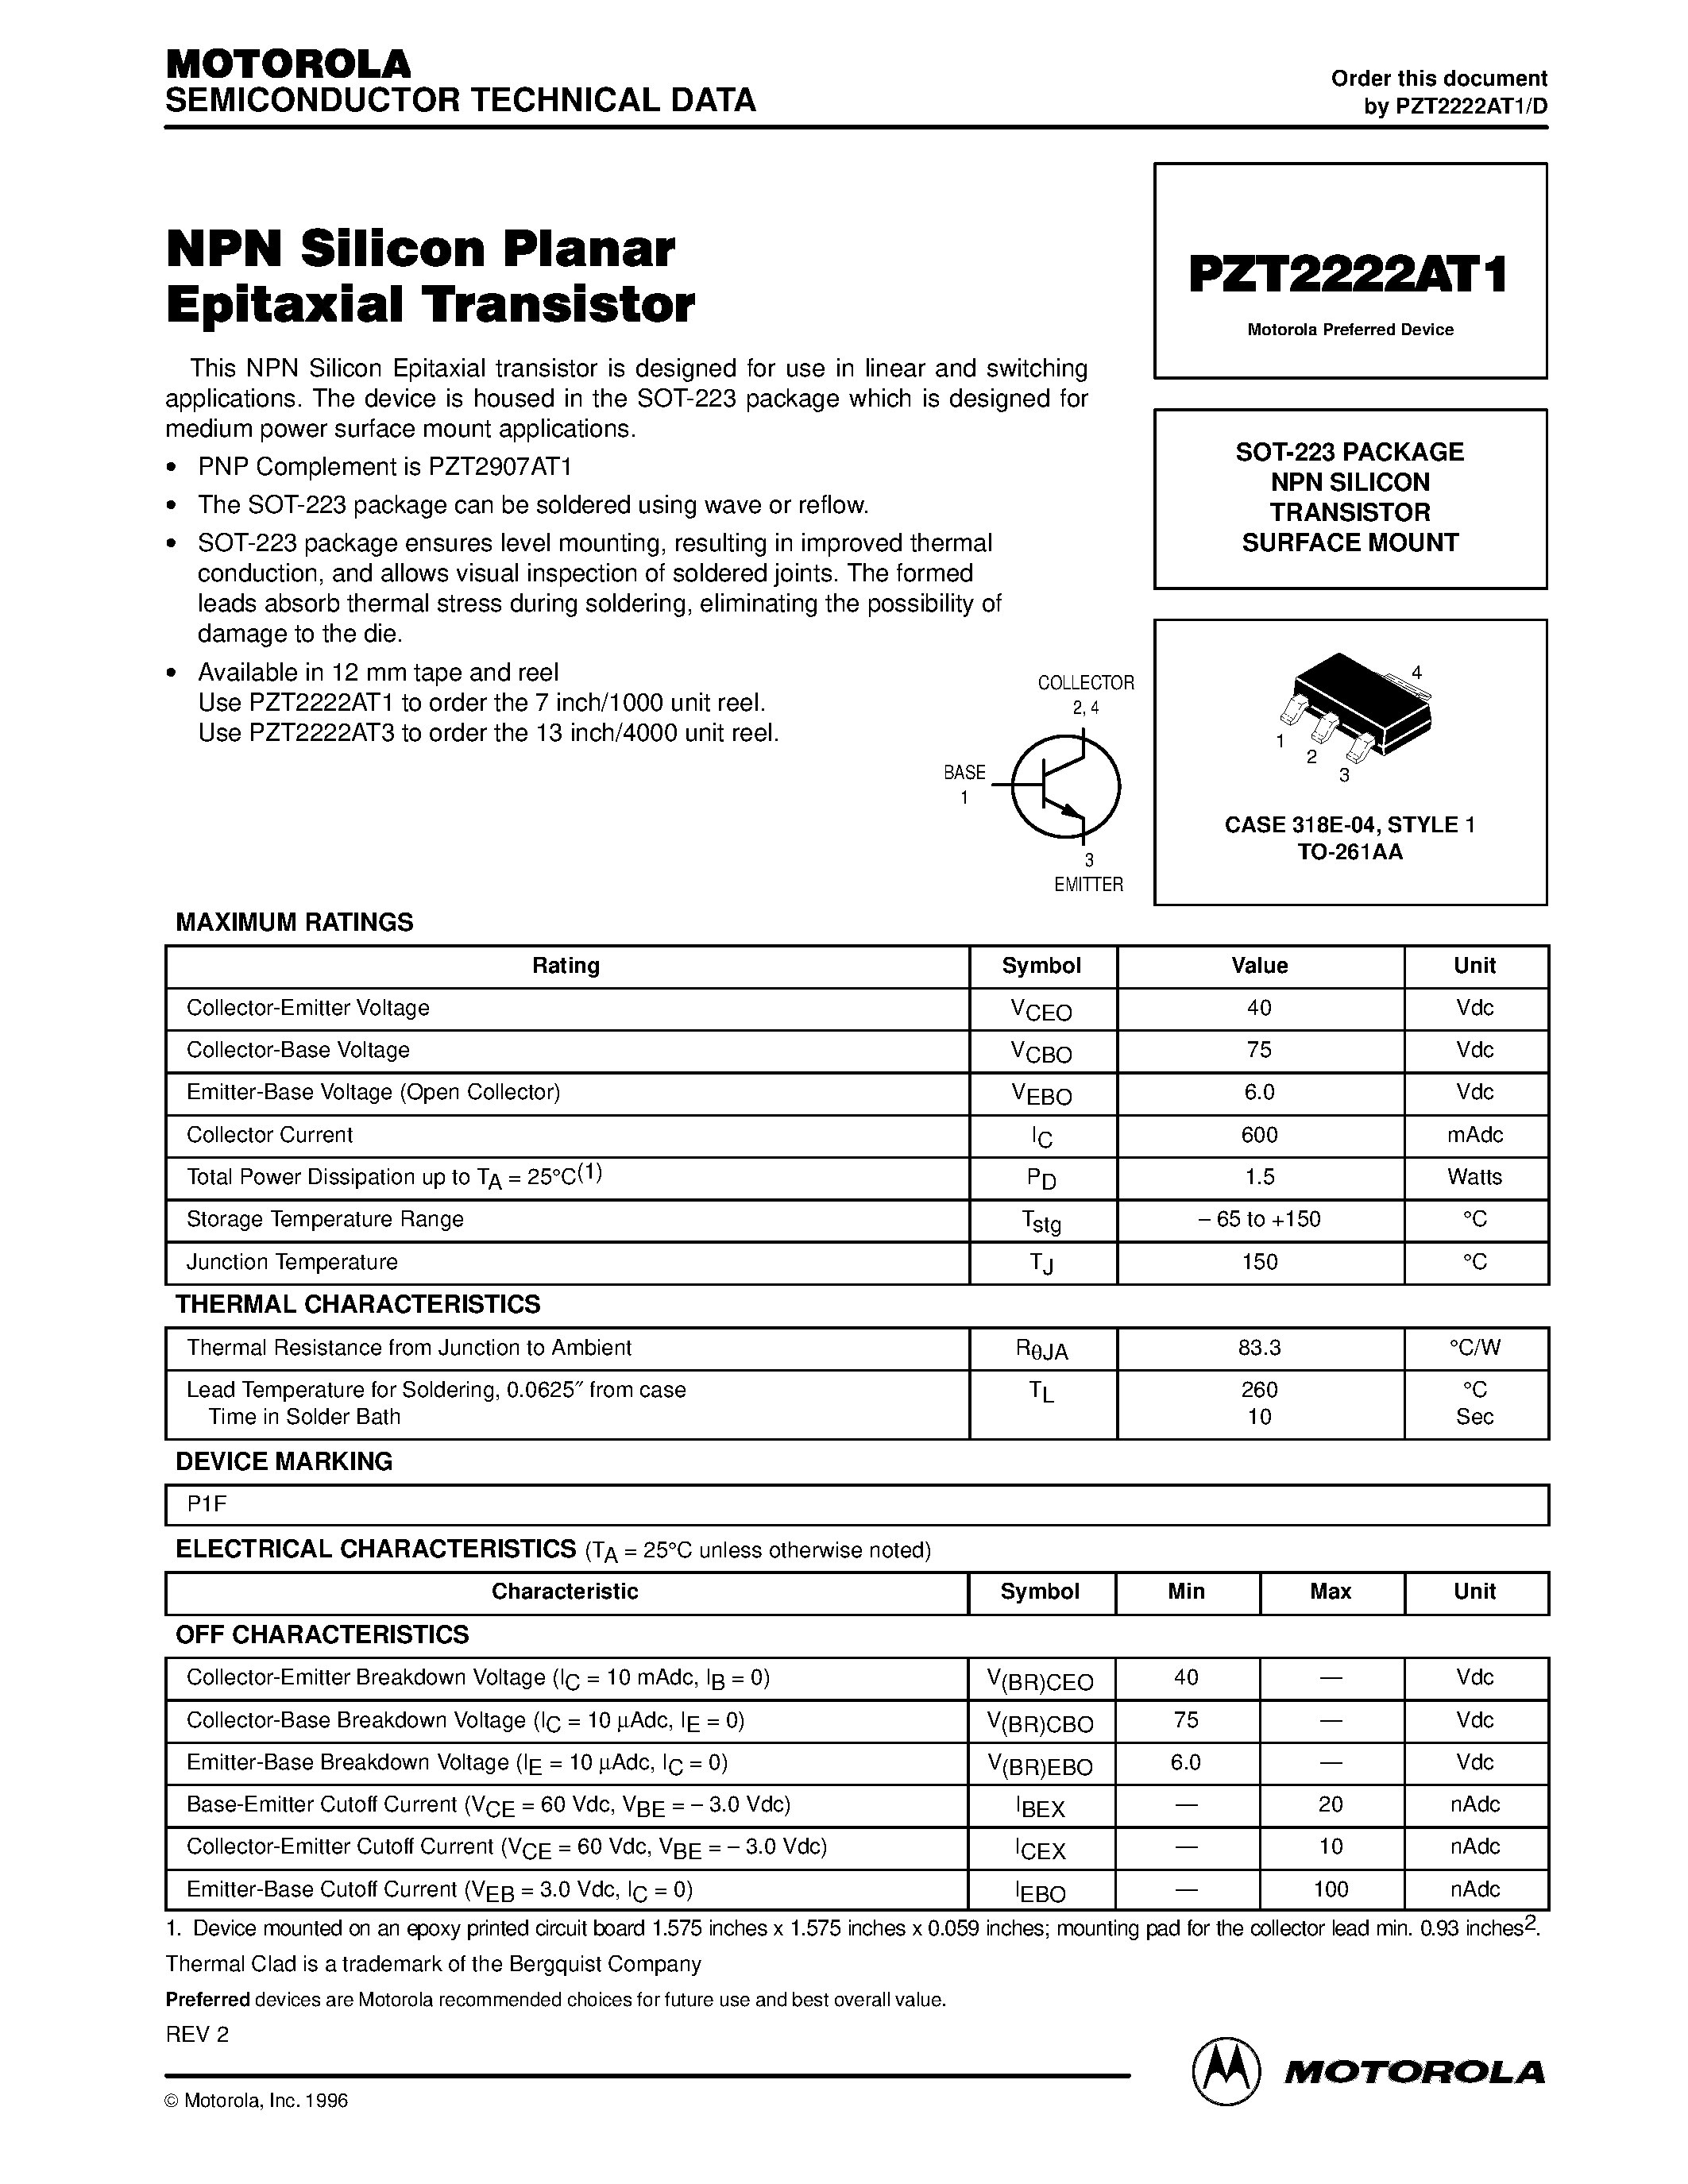 Datasheet PZT2222AT1 - NPN SILICON TRANSISTOR SURFACE MOUNT page 1